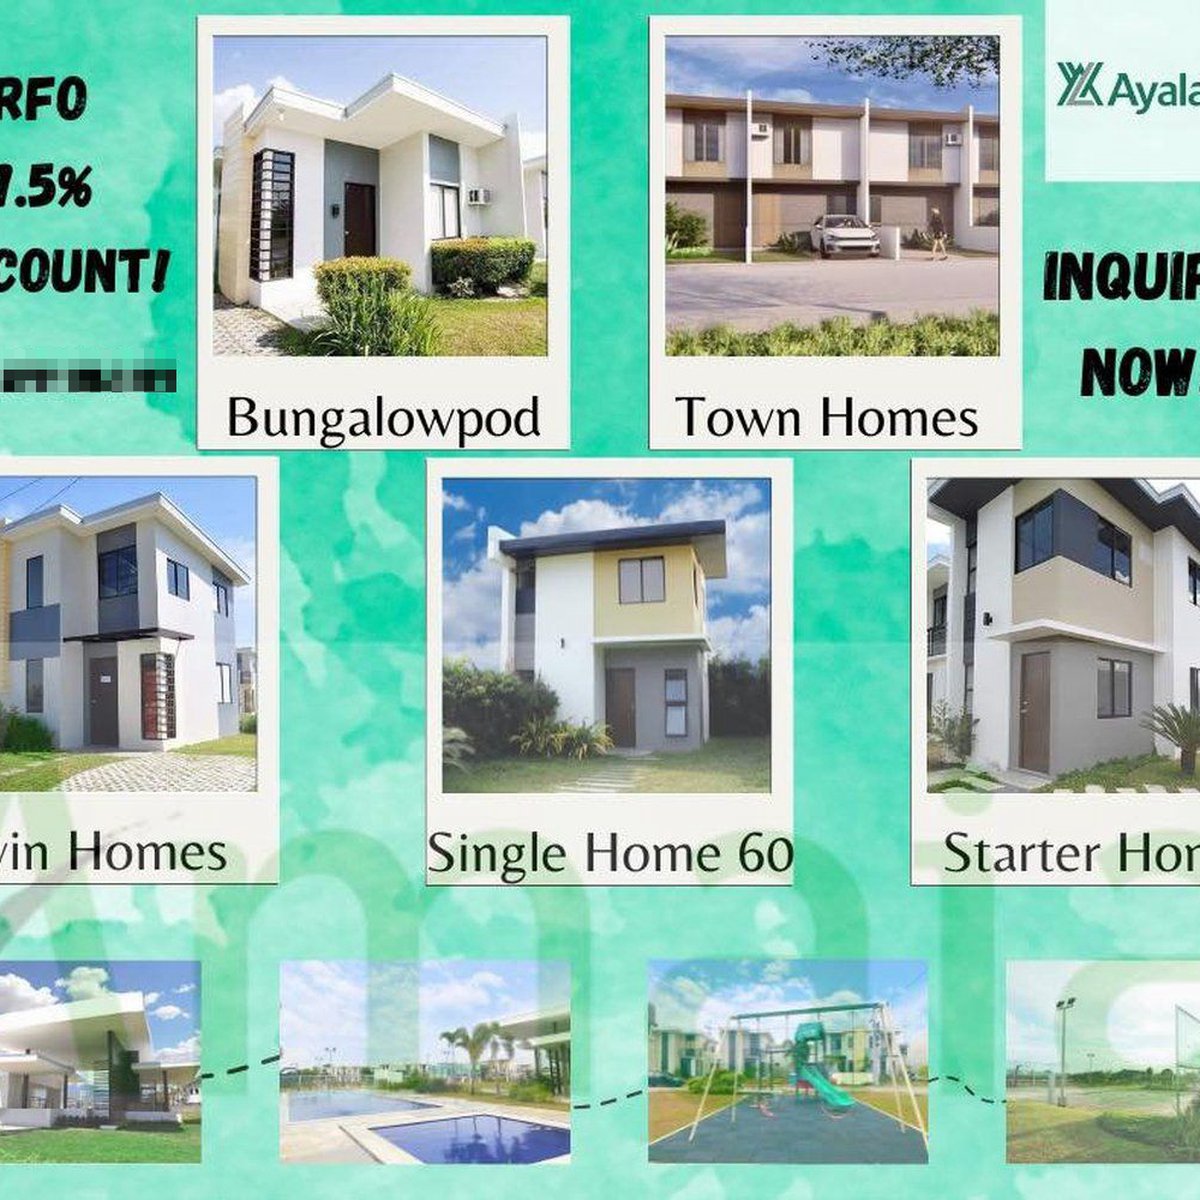 Affordable and Quality trusted property in Ayala Land